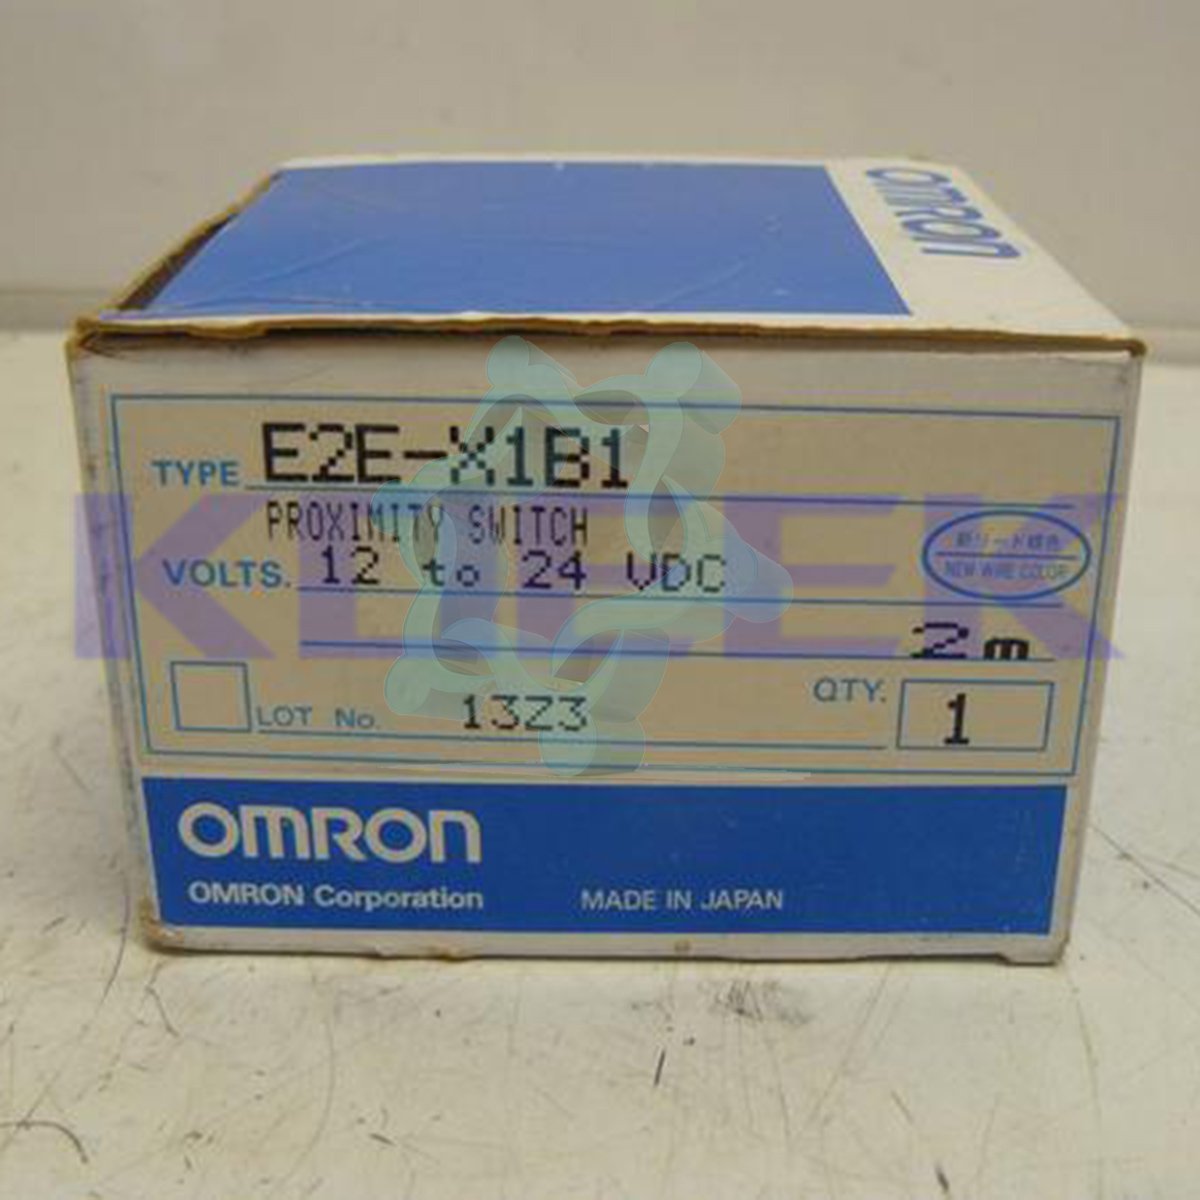 E2E-X1B1 KOEED 1, 80%, import_2020_10_10_031751, Omron, Other